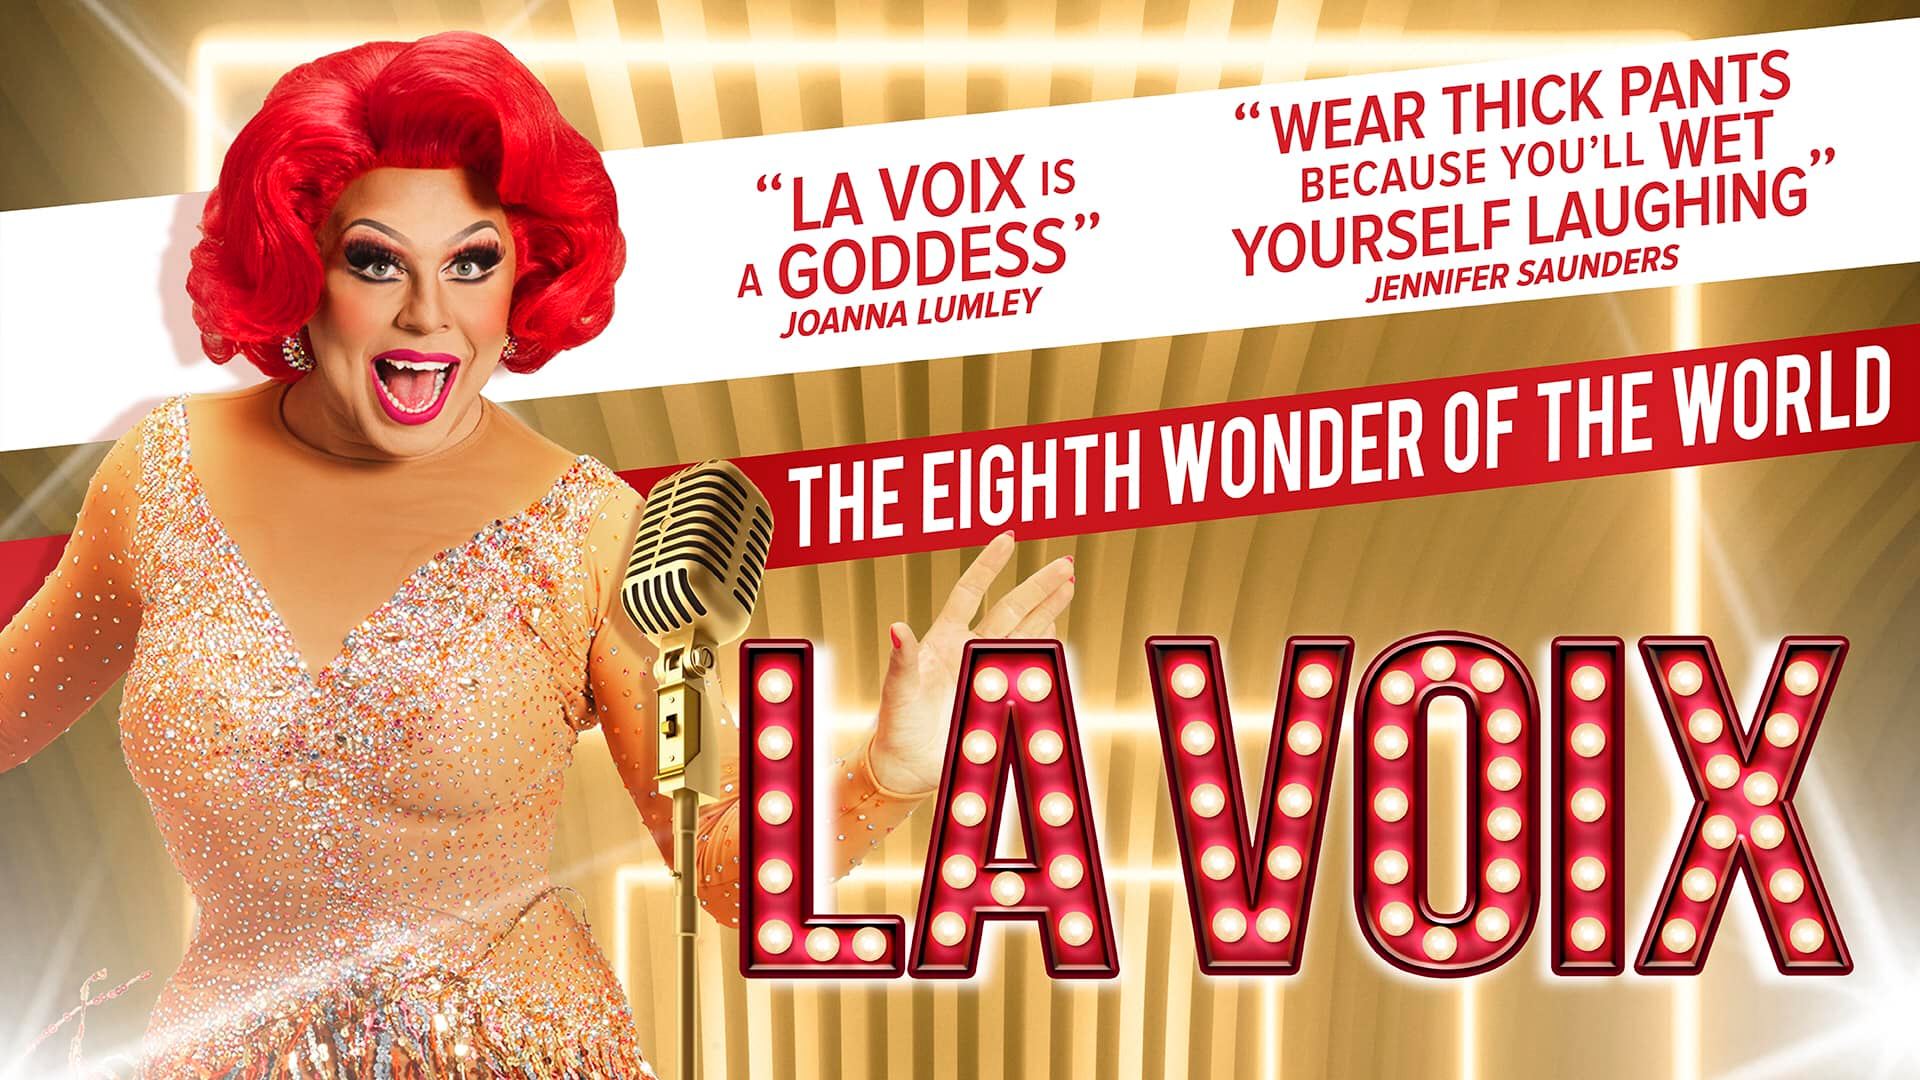 Do not miss the show with La Voix and her incredible musicians through a trip of music and comedy. Get La Voix London tickets.